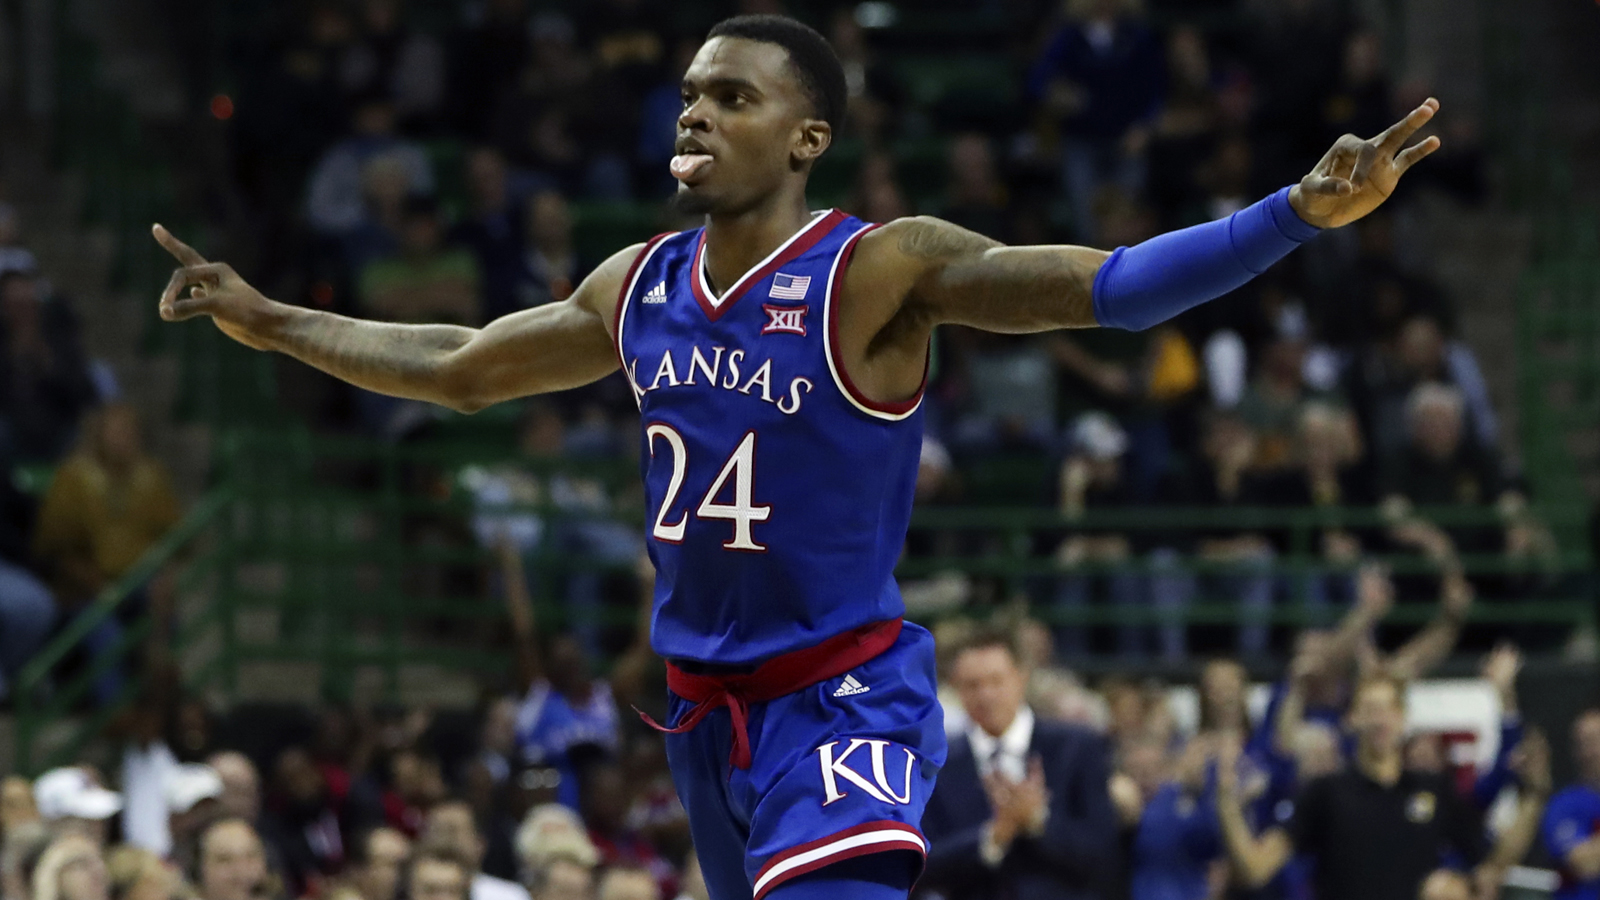 Vick sinks six 3-pointers in Kansas' 73-68 win over Baylor